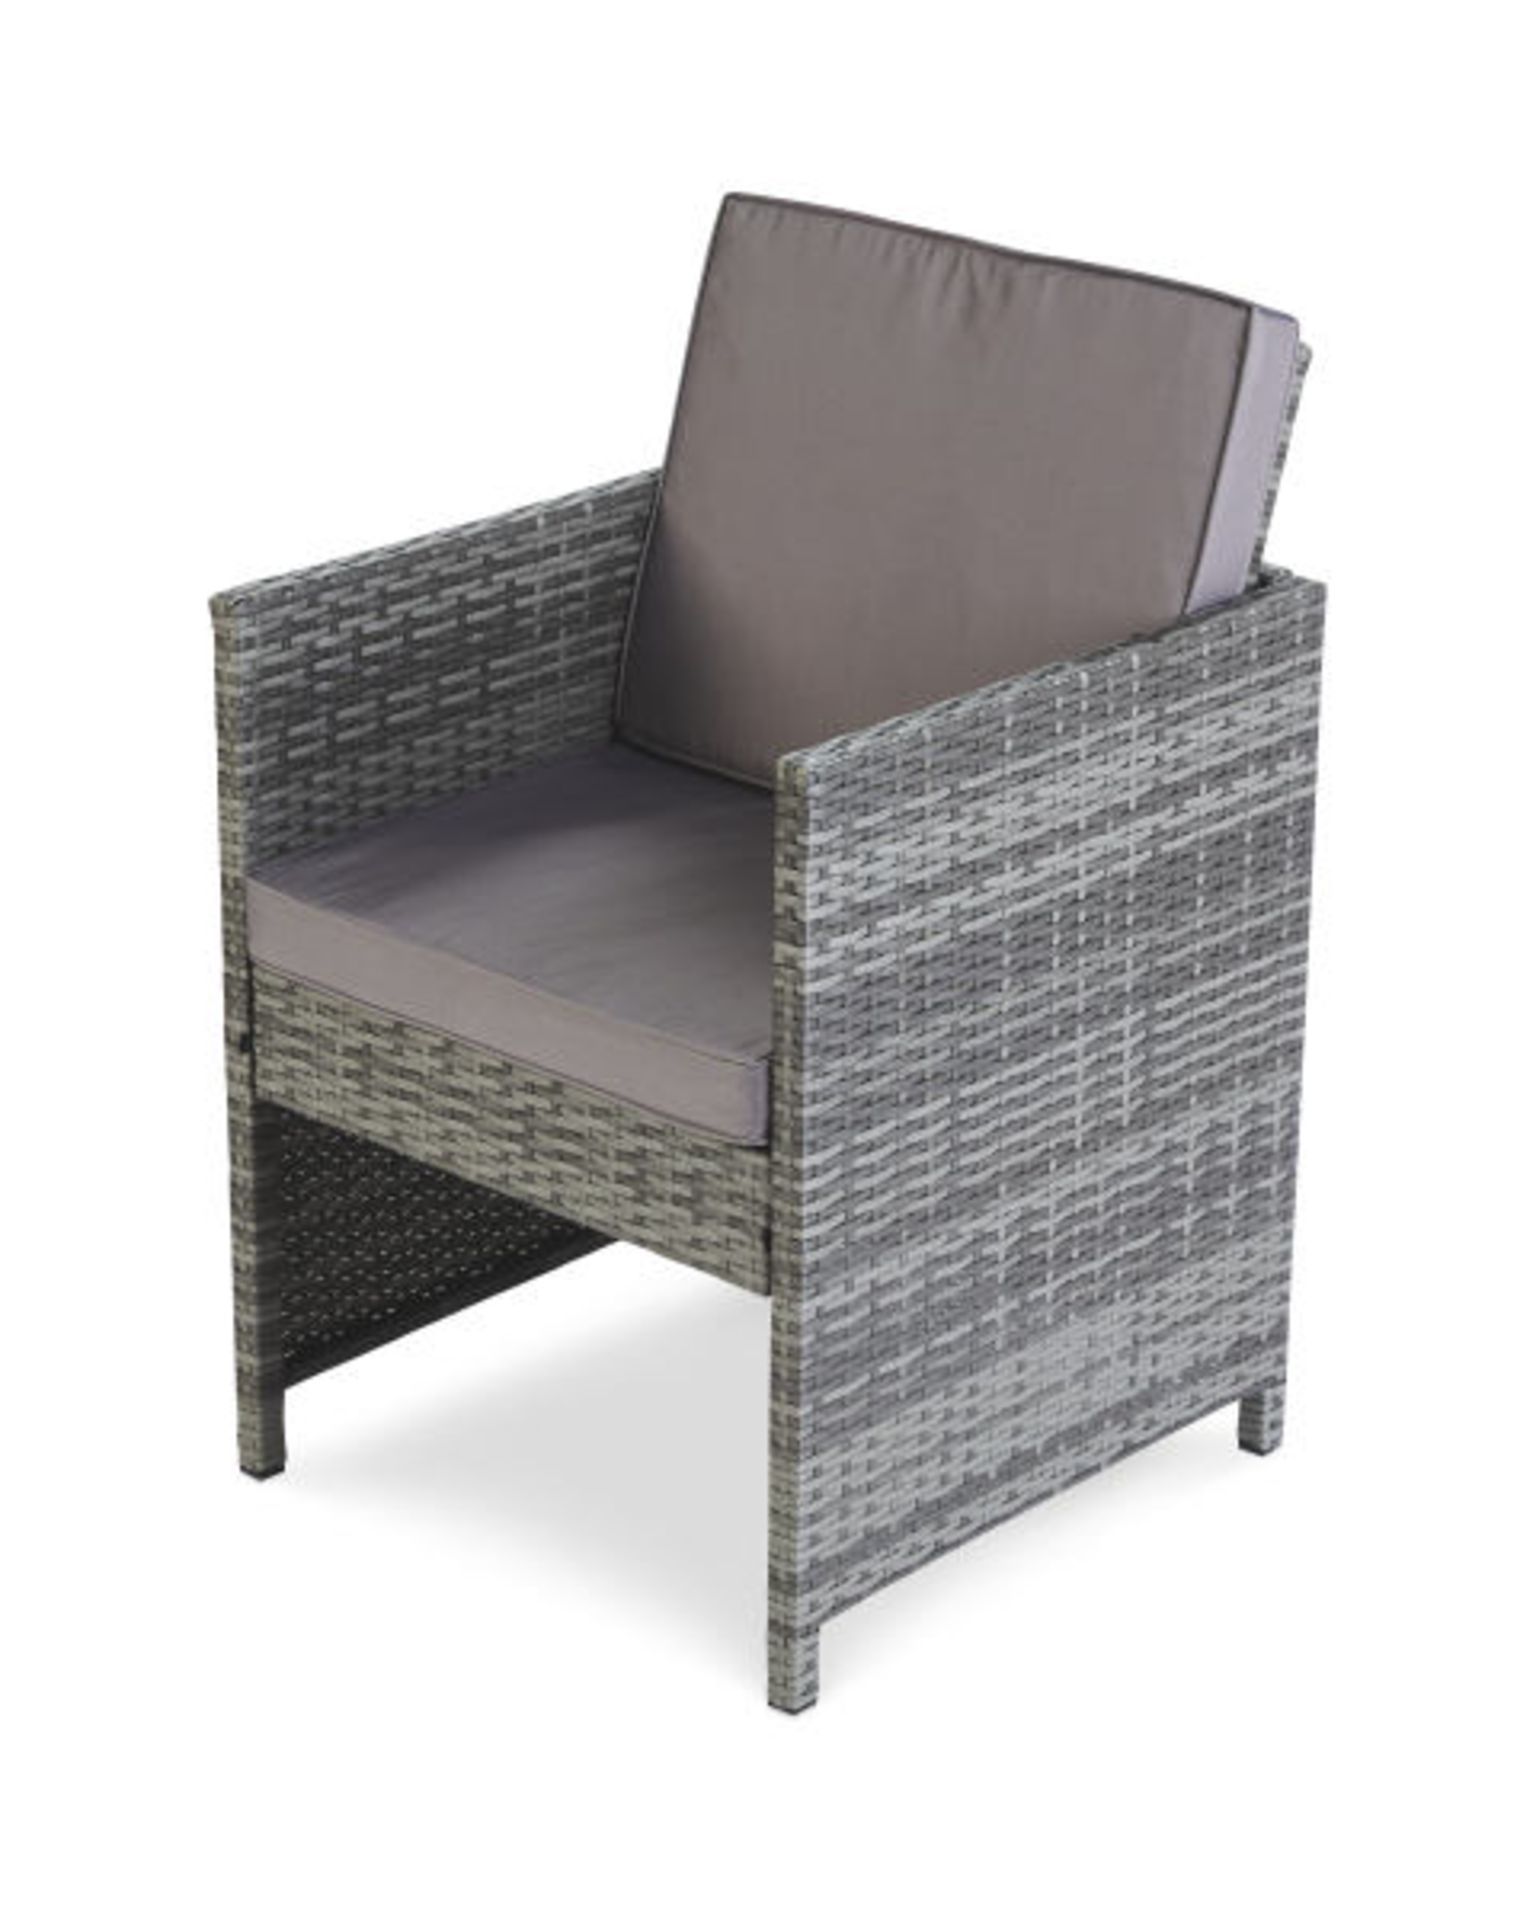 Luxury Rocking Bistro Set. Sit back and rock away in style with this stunning Luxury Rocking - Image 3 of 5